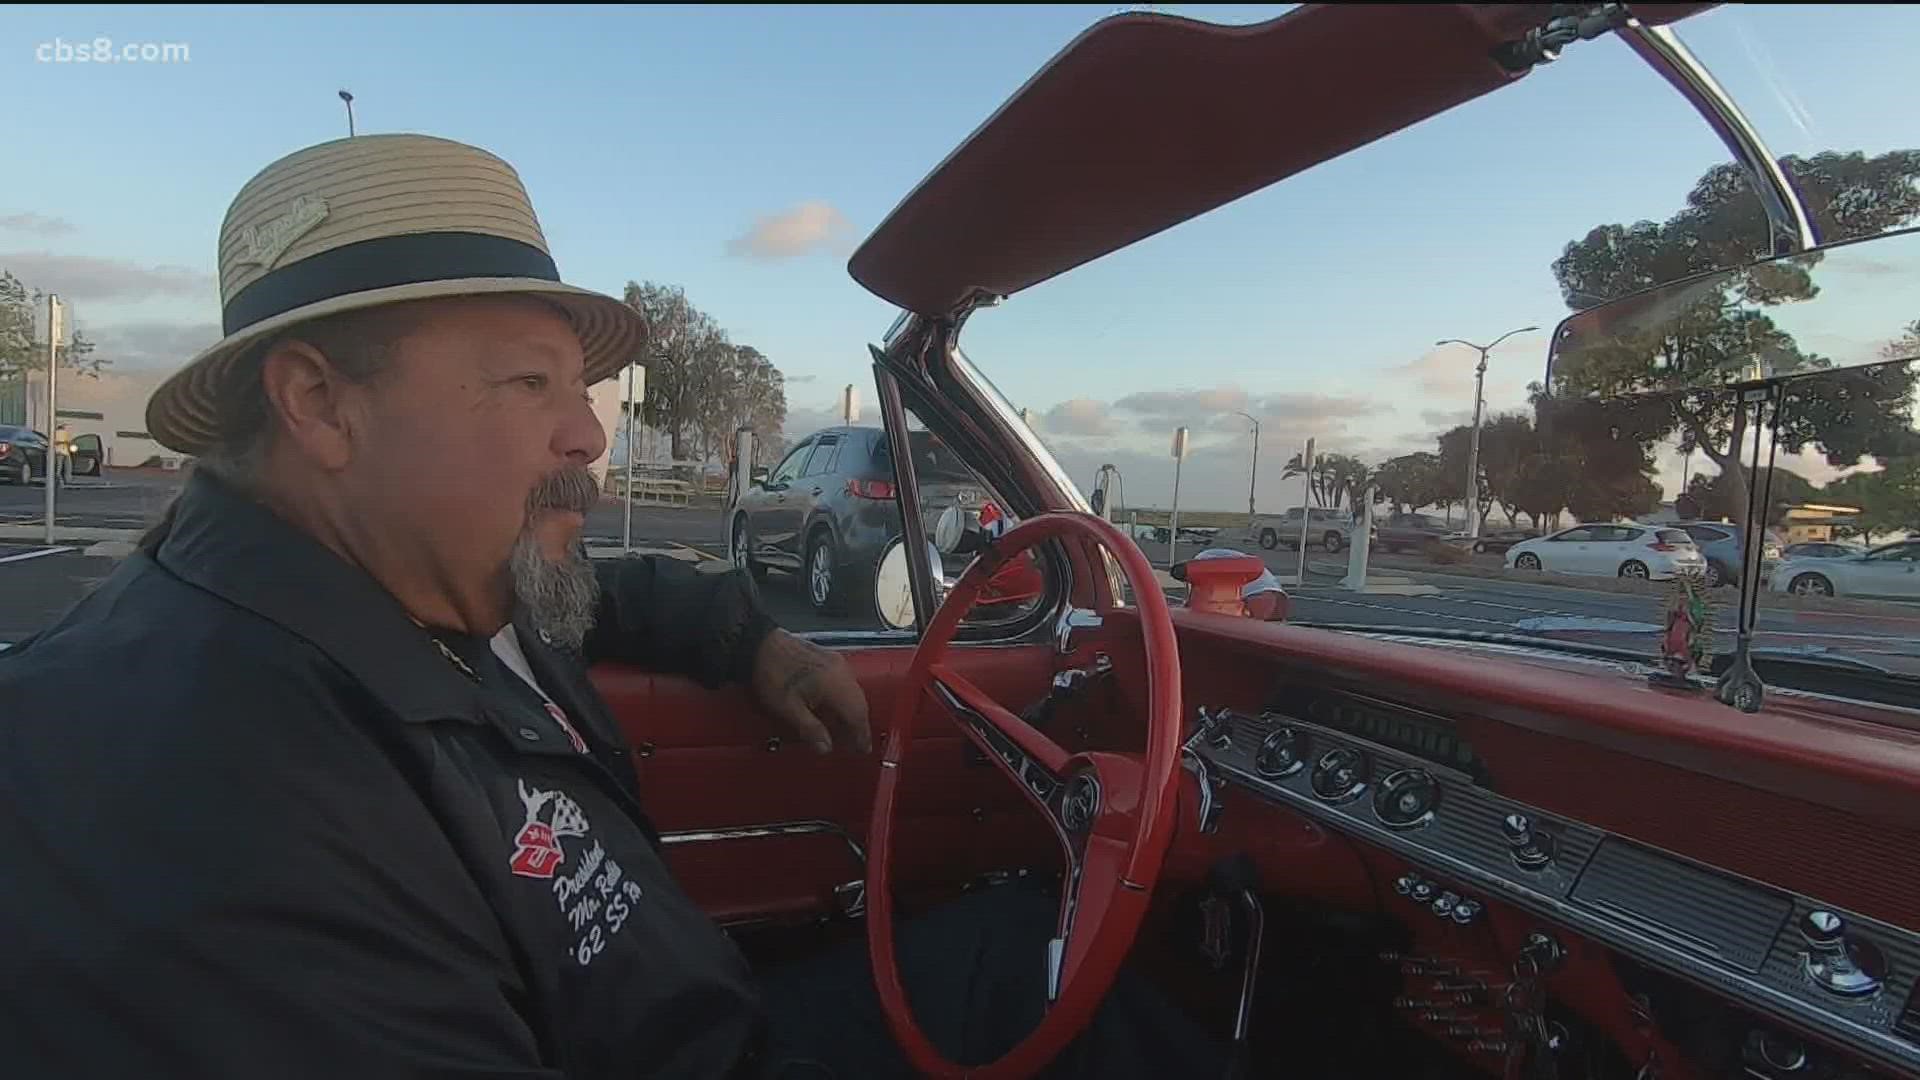 National City council granted a permit to the United Lowrider Coalition to cruise once again. The cruises will take place on the first Friday, starting in May.